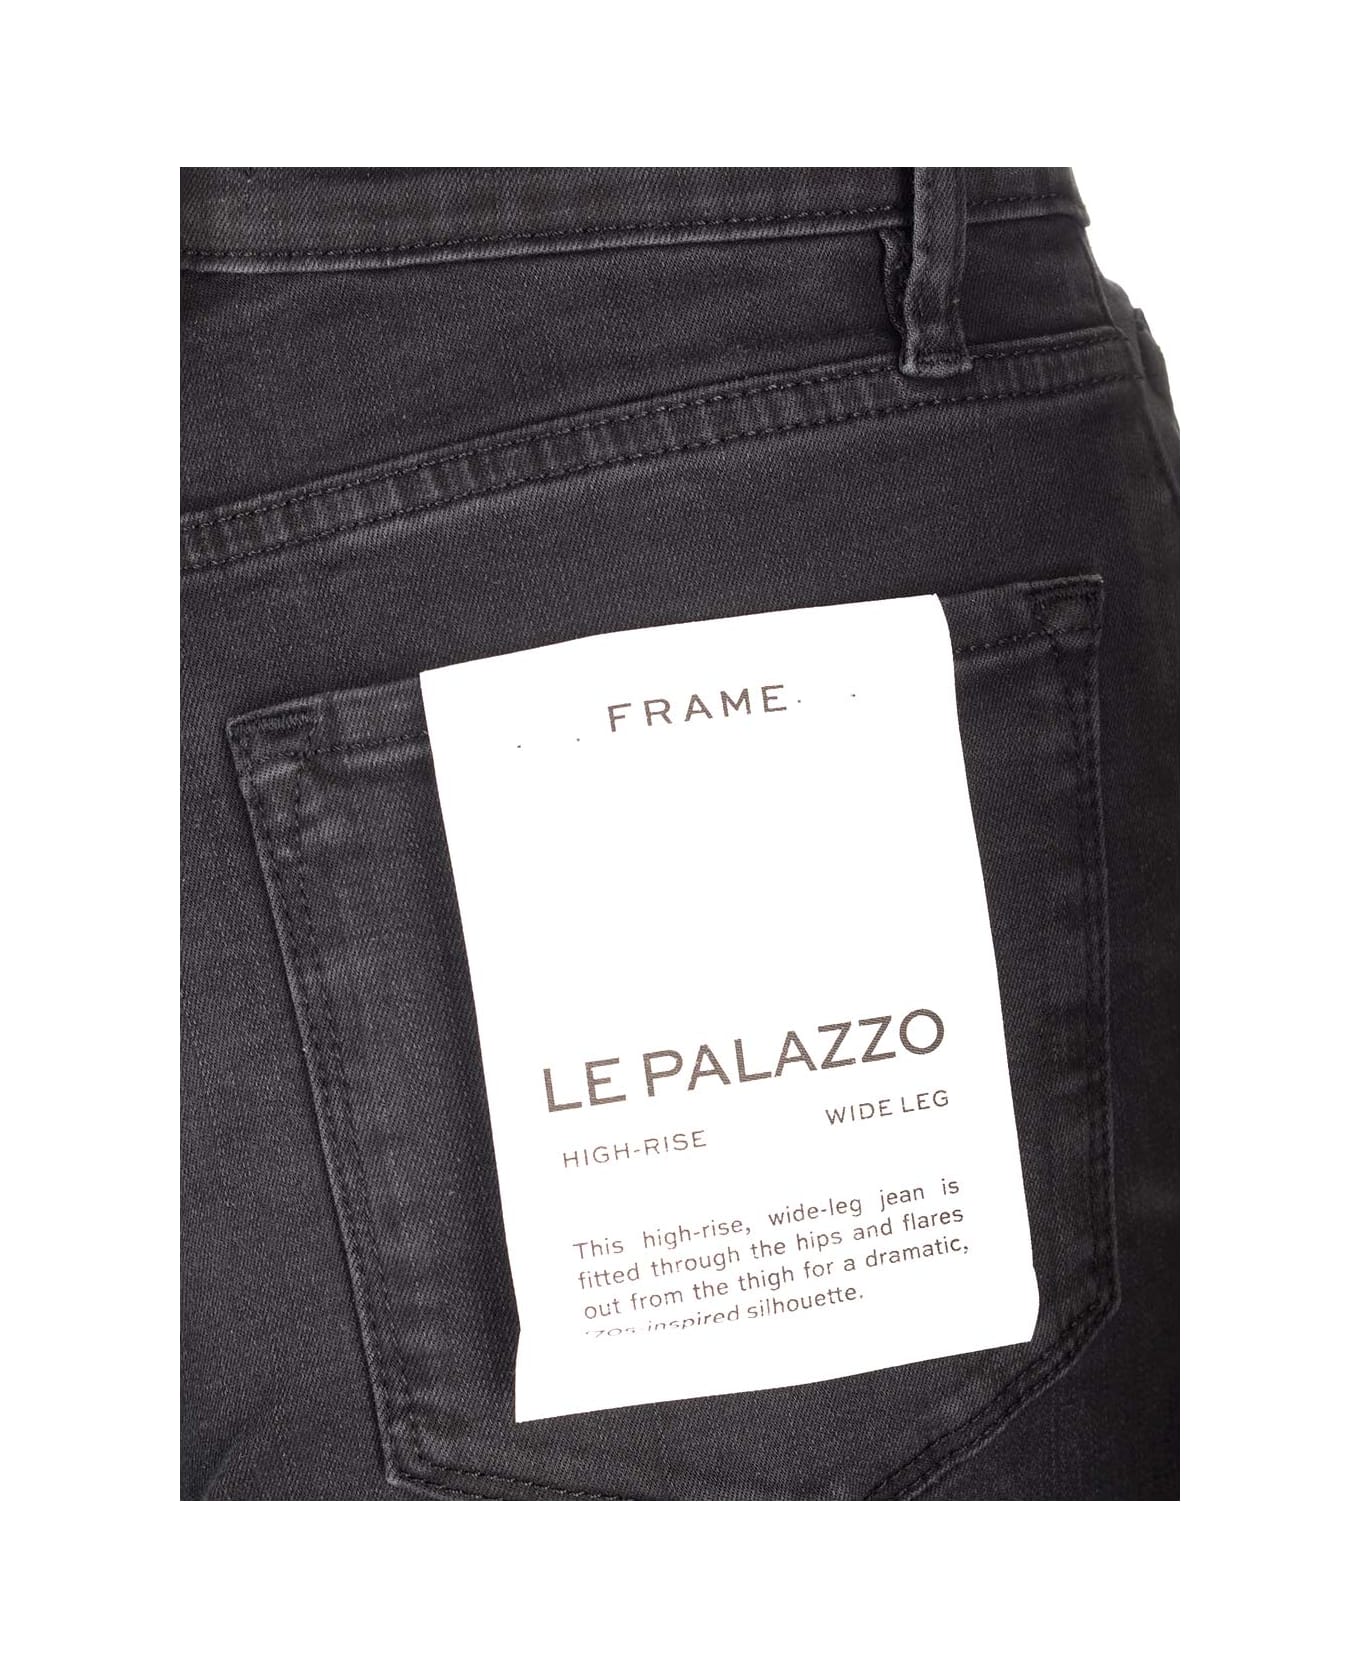 Frame 'kerry' Palazzo Jeans - Black